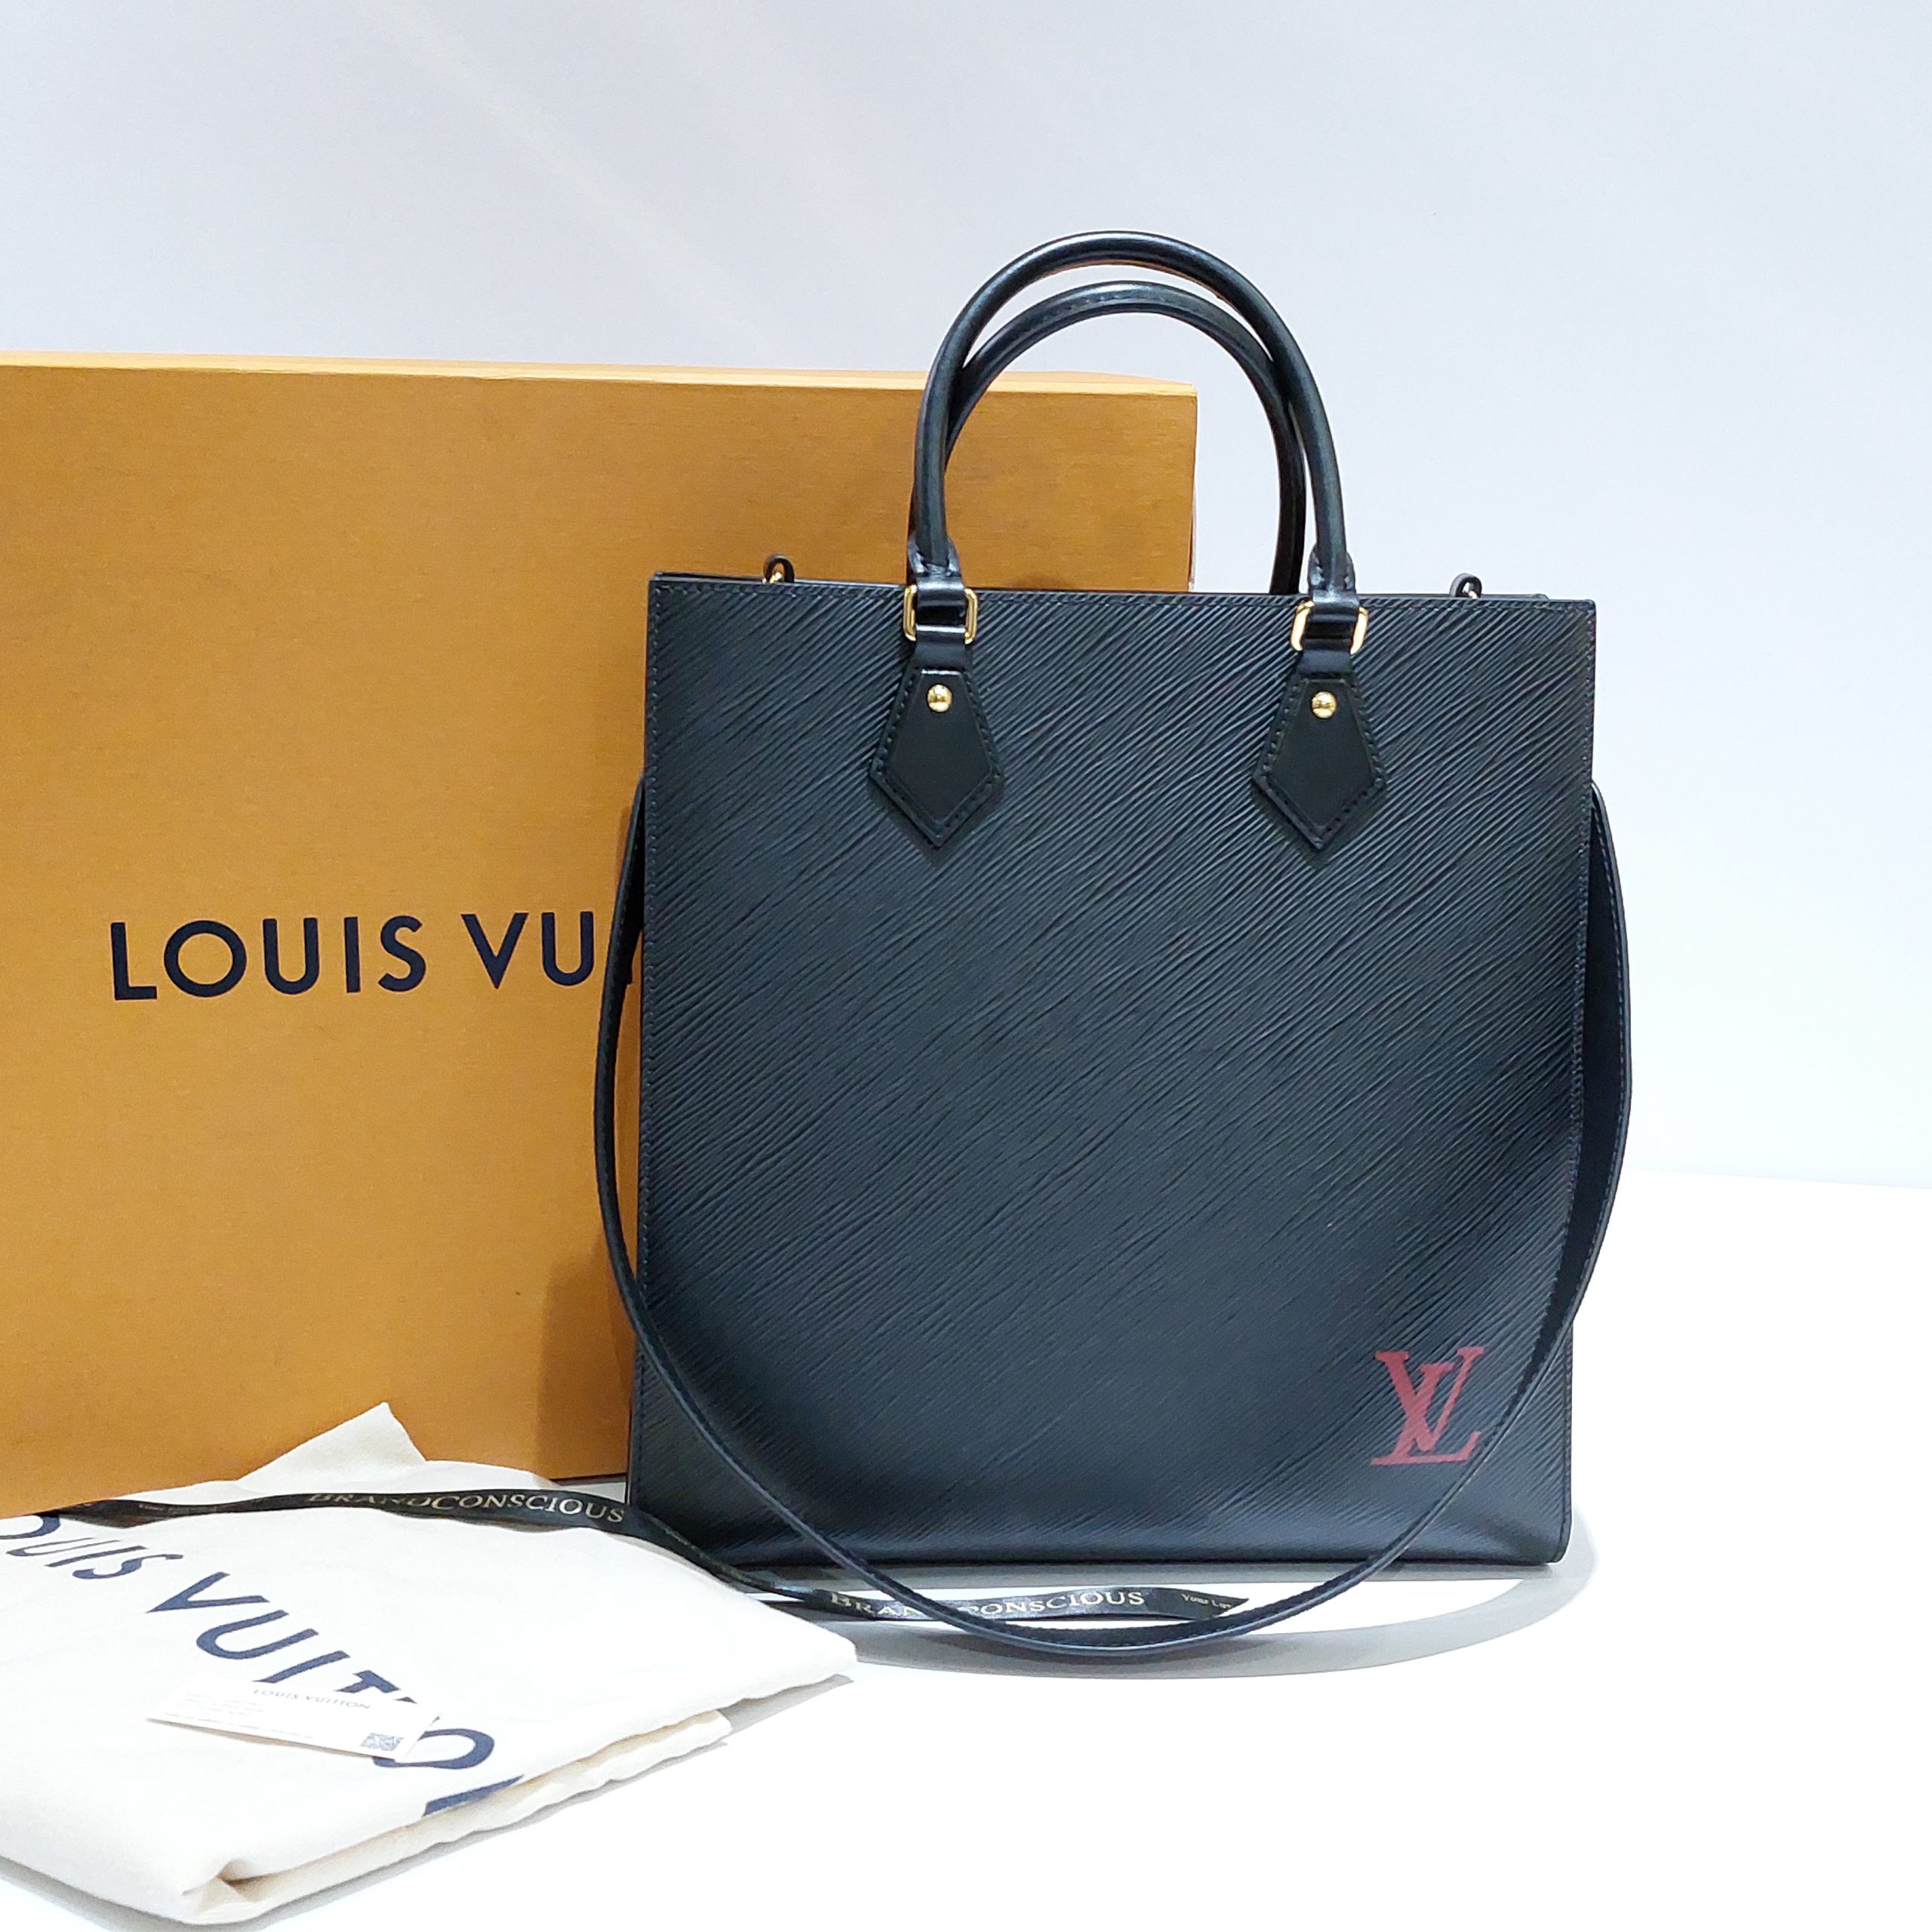 LOUIS VUITTON SAC PLAT PM- WHAT FITS FOR MAMA'S, TRAVEL, AND ALL THINGS IN  BETWEEN!! #wimb 